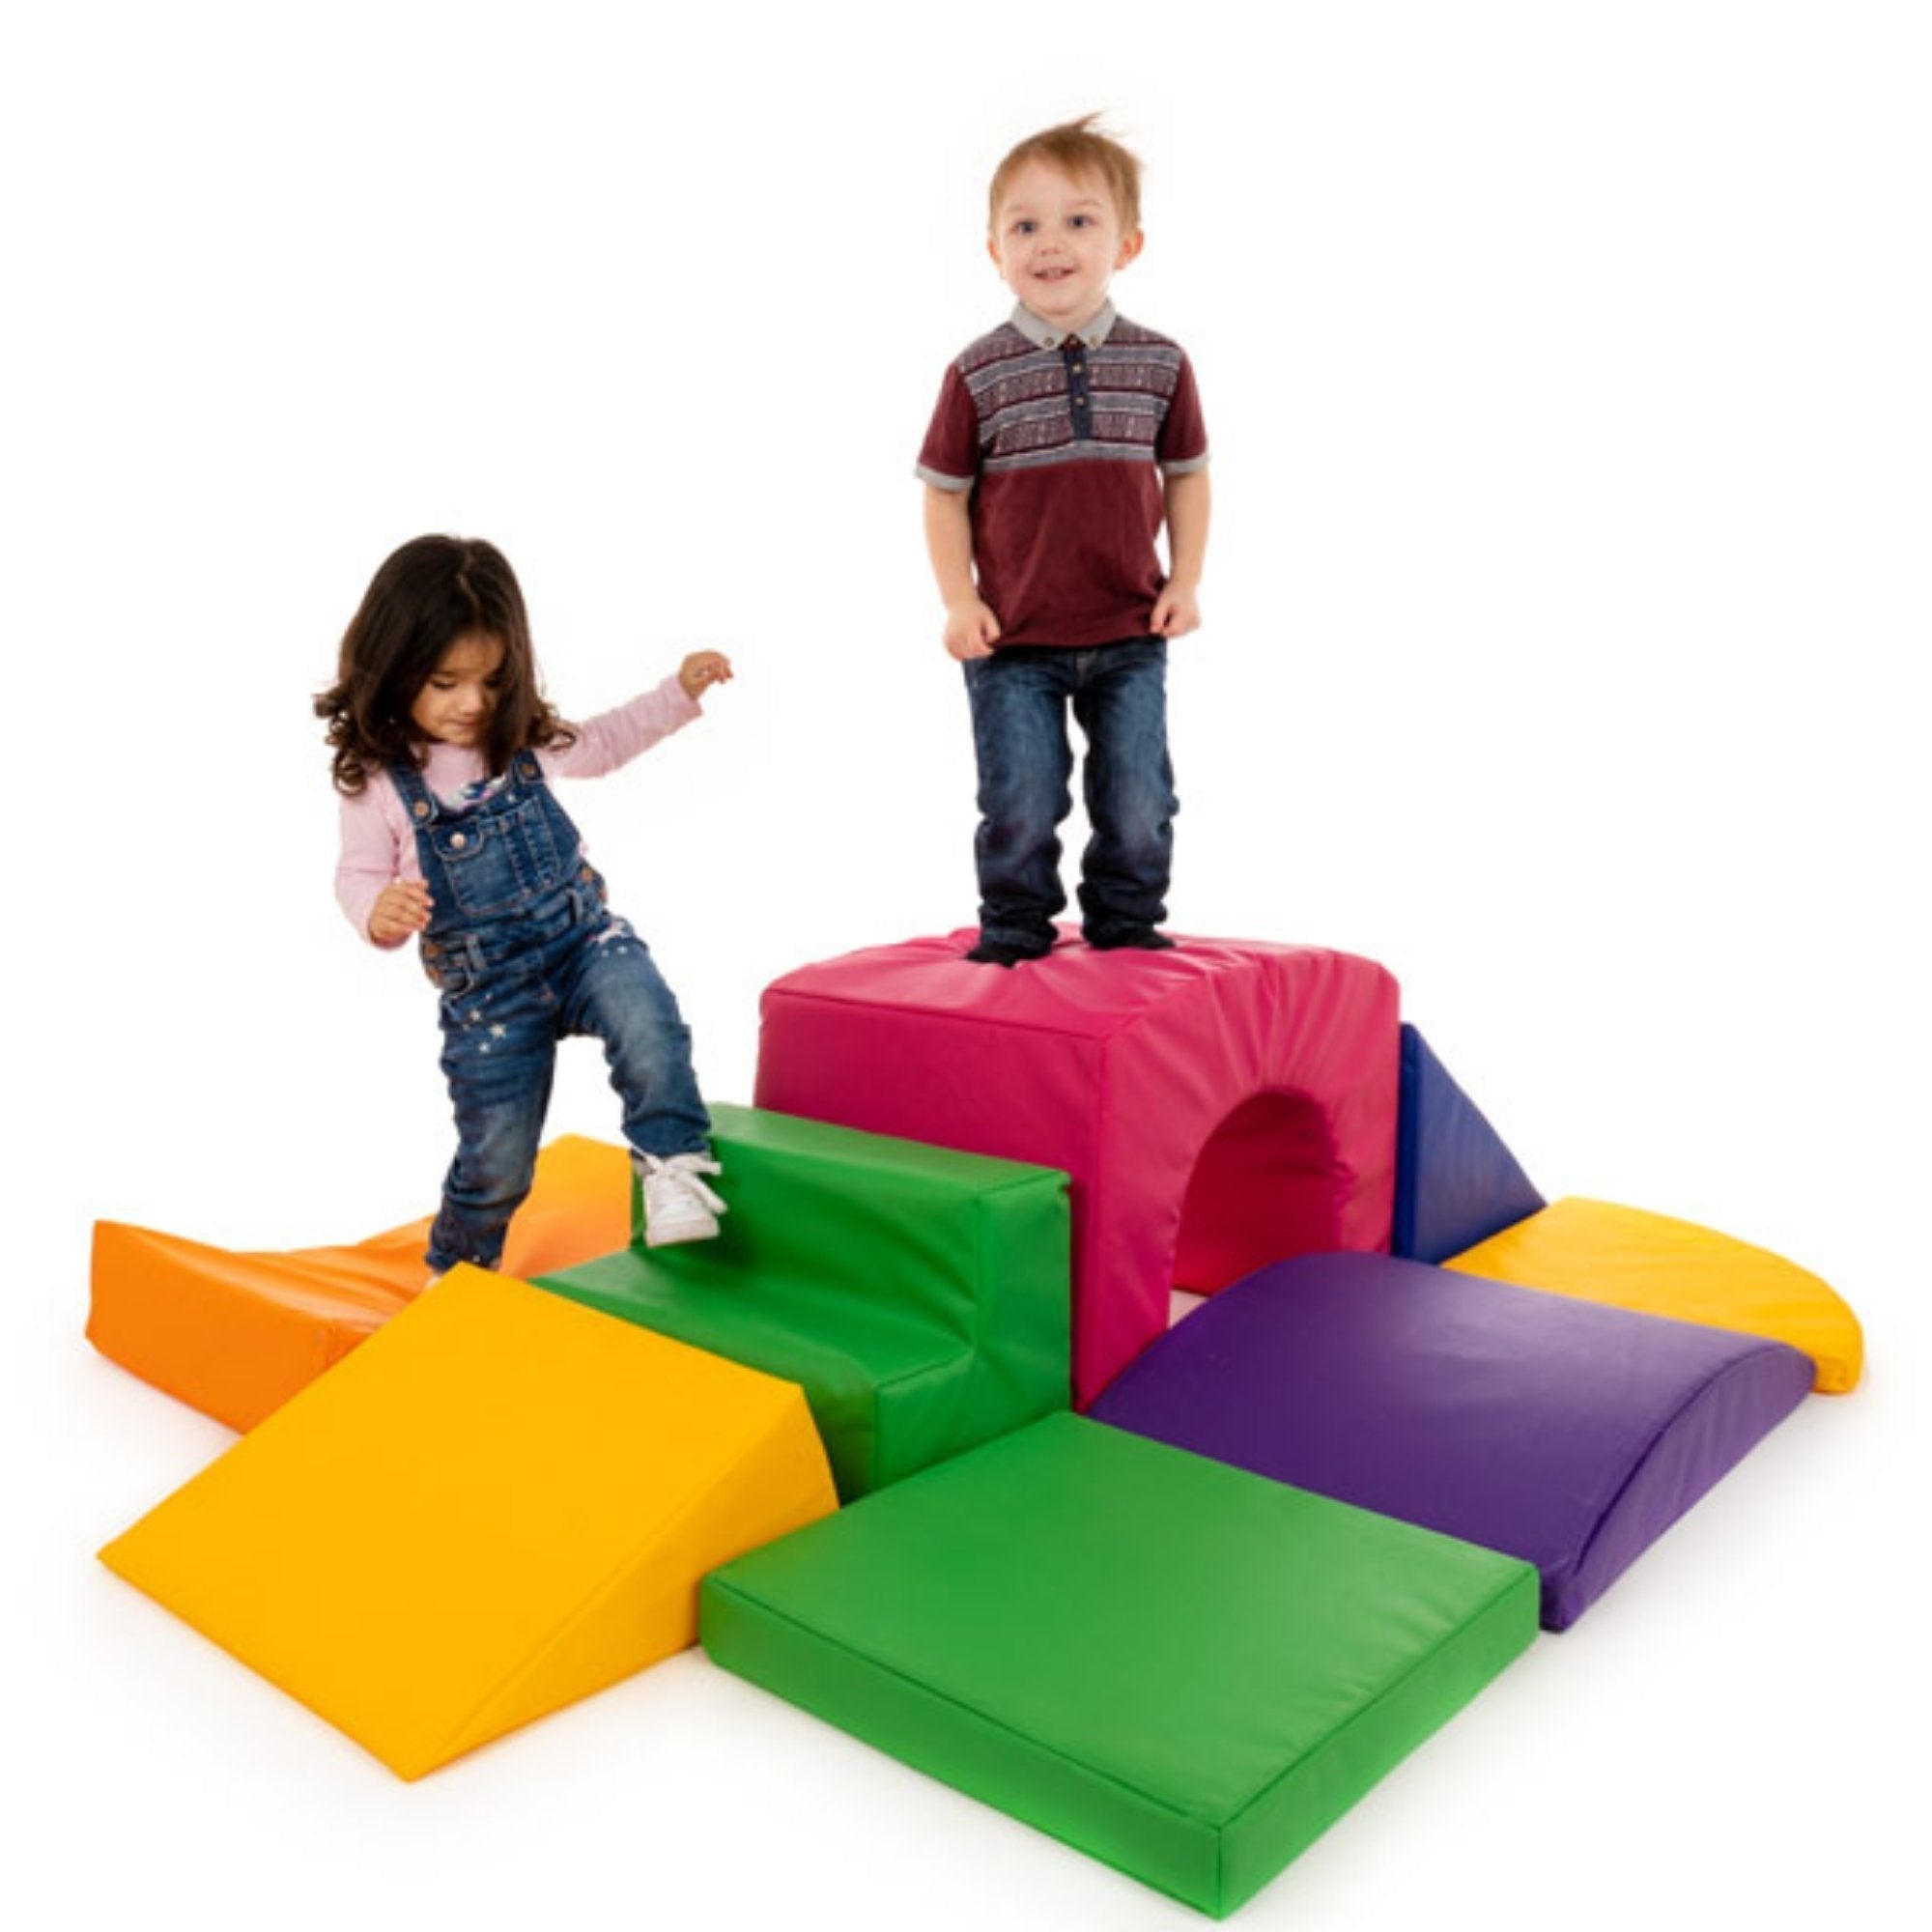 Exploration Area Large Soft Play Set, The Exploration Area Large Soft Play Set is a fantastic piece of Soft Play that will add colour, style and value to any setting. The Exploration Area Large Soft Play Set is designed to be used by both babies and toddlers, making it extremely versatile. The individual shapes provide a soft and interesting floor to crawl over, or a challenging uneven surface for toddlers to walk on with the taller pieces used for support. The different shapes add a challenge and build con